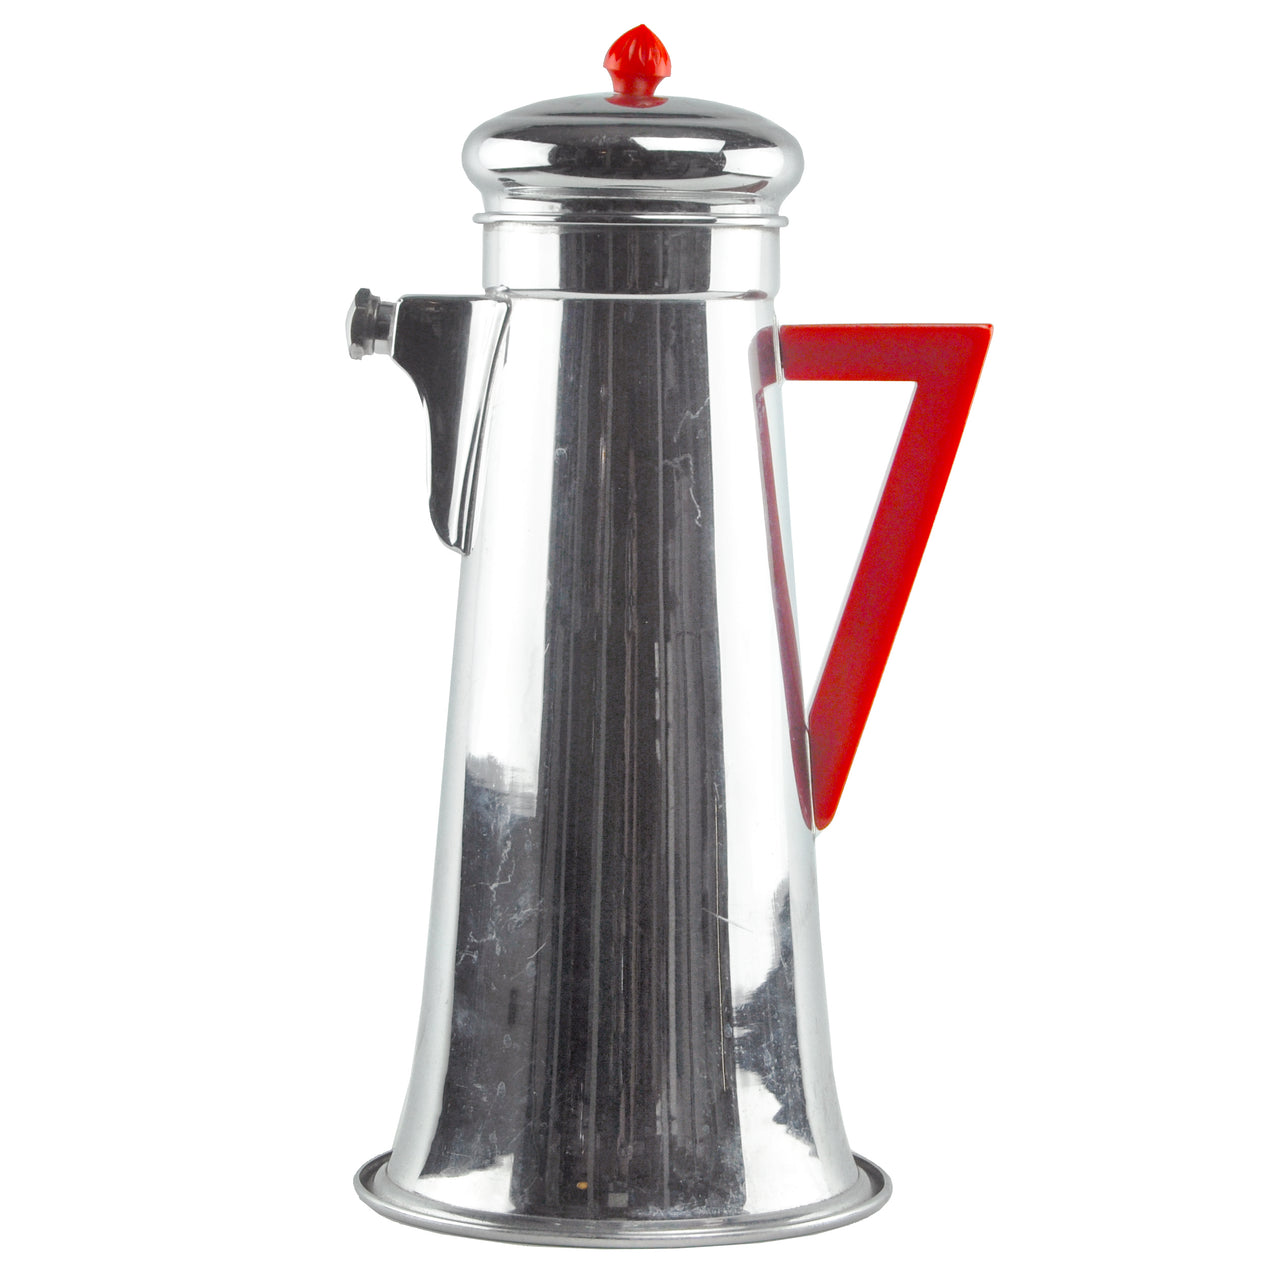 Forman Brothers Red Handle Cocktail Recipe Shaker